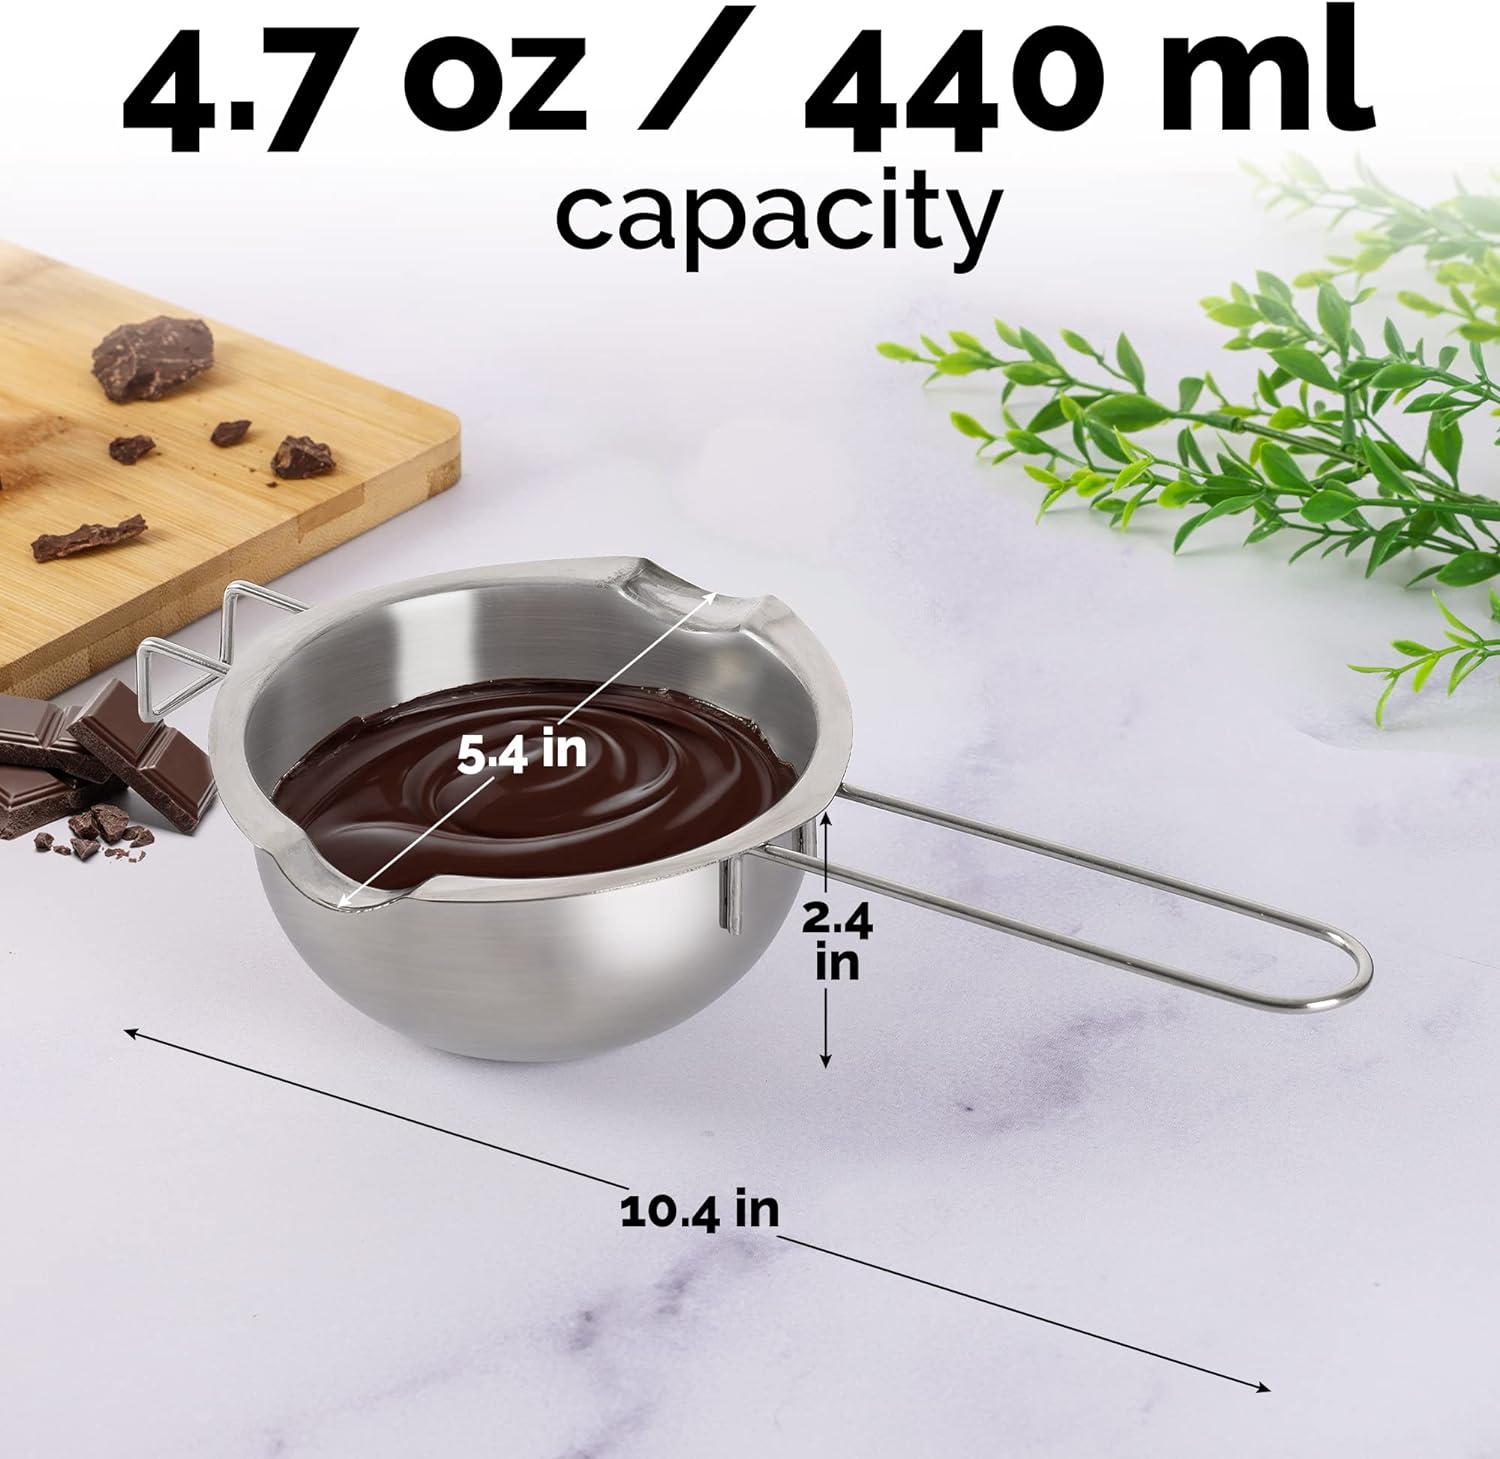 1 Set Double Boiler Pot Stainless Steel Chocolate Melting Pot Furnace  Heated with Handle Baking Tool for Melting Chocolate, Candy and Candle  Making